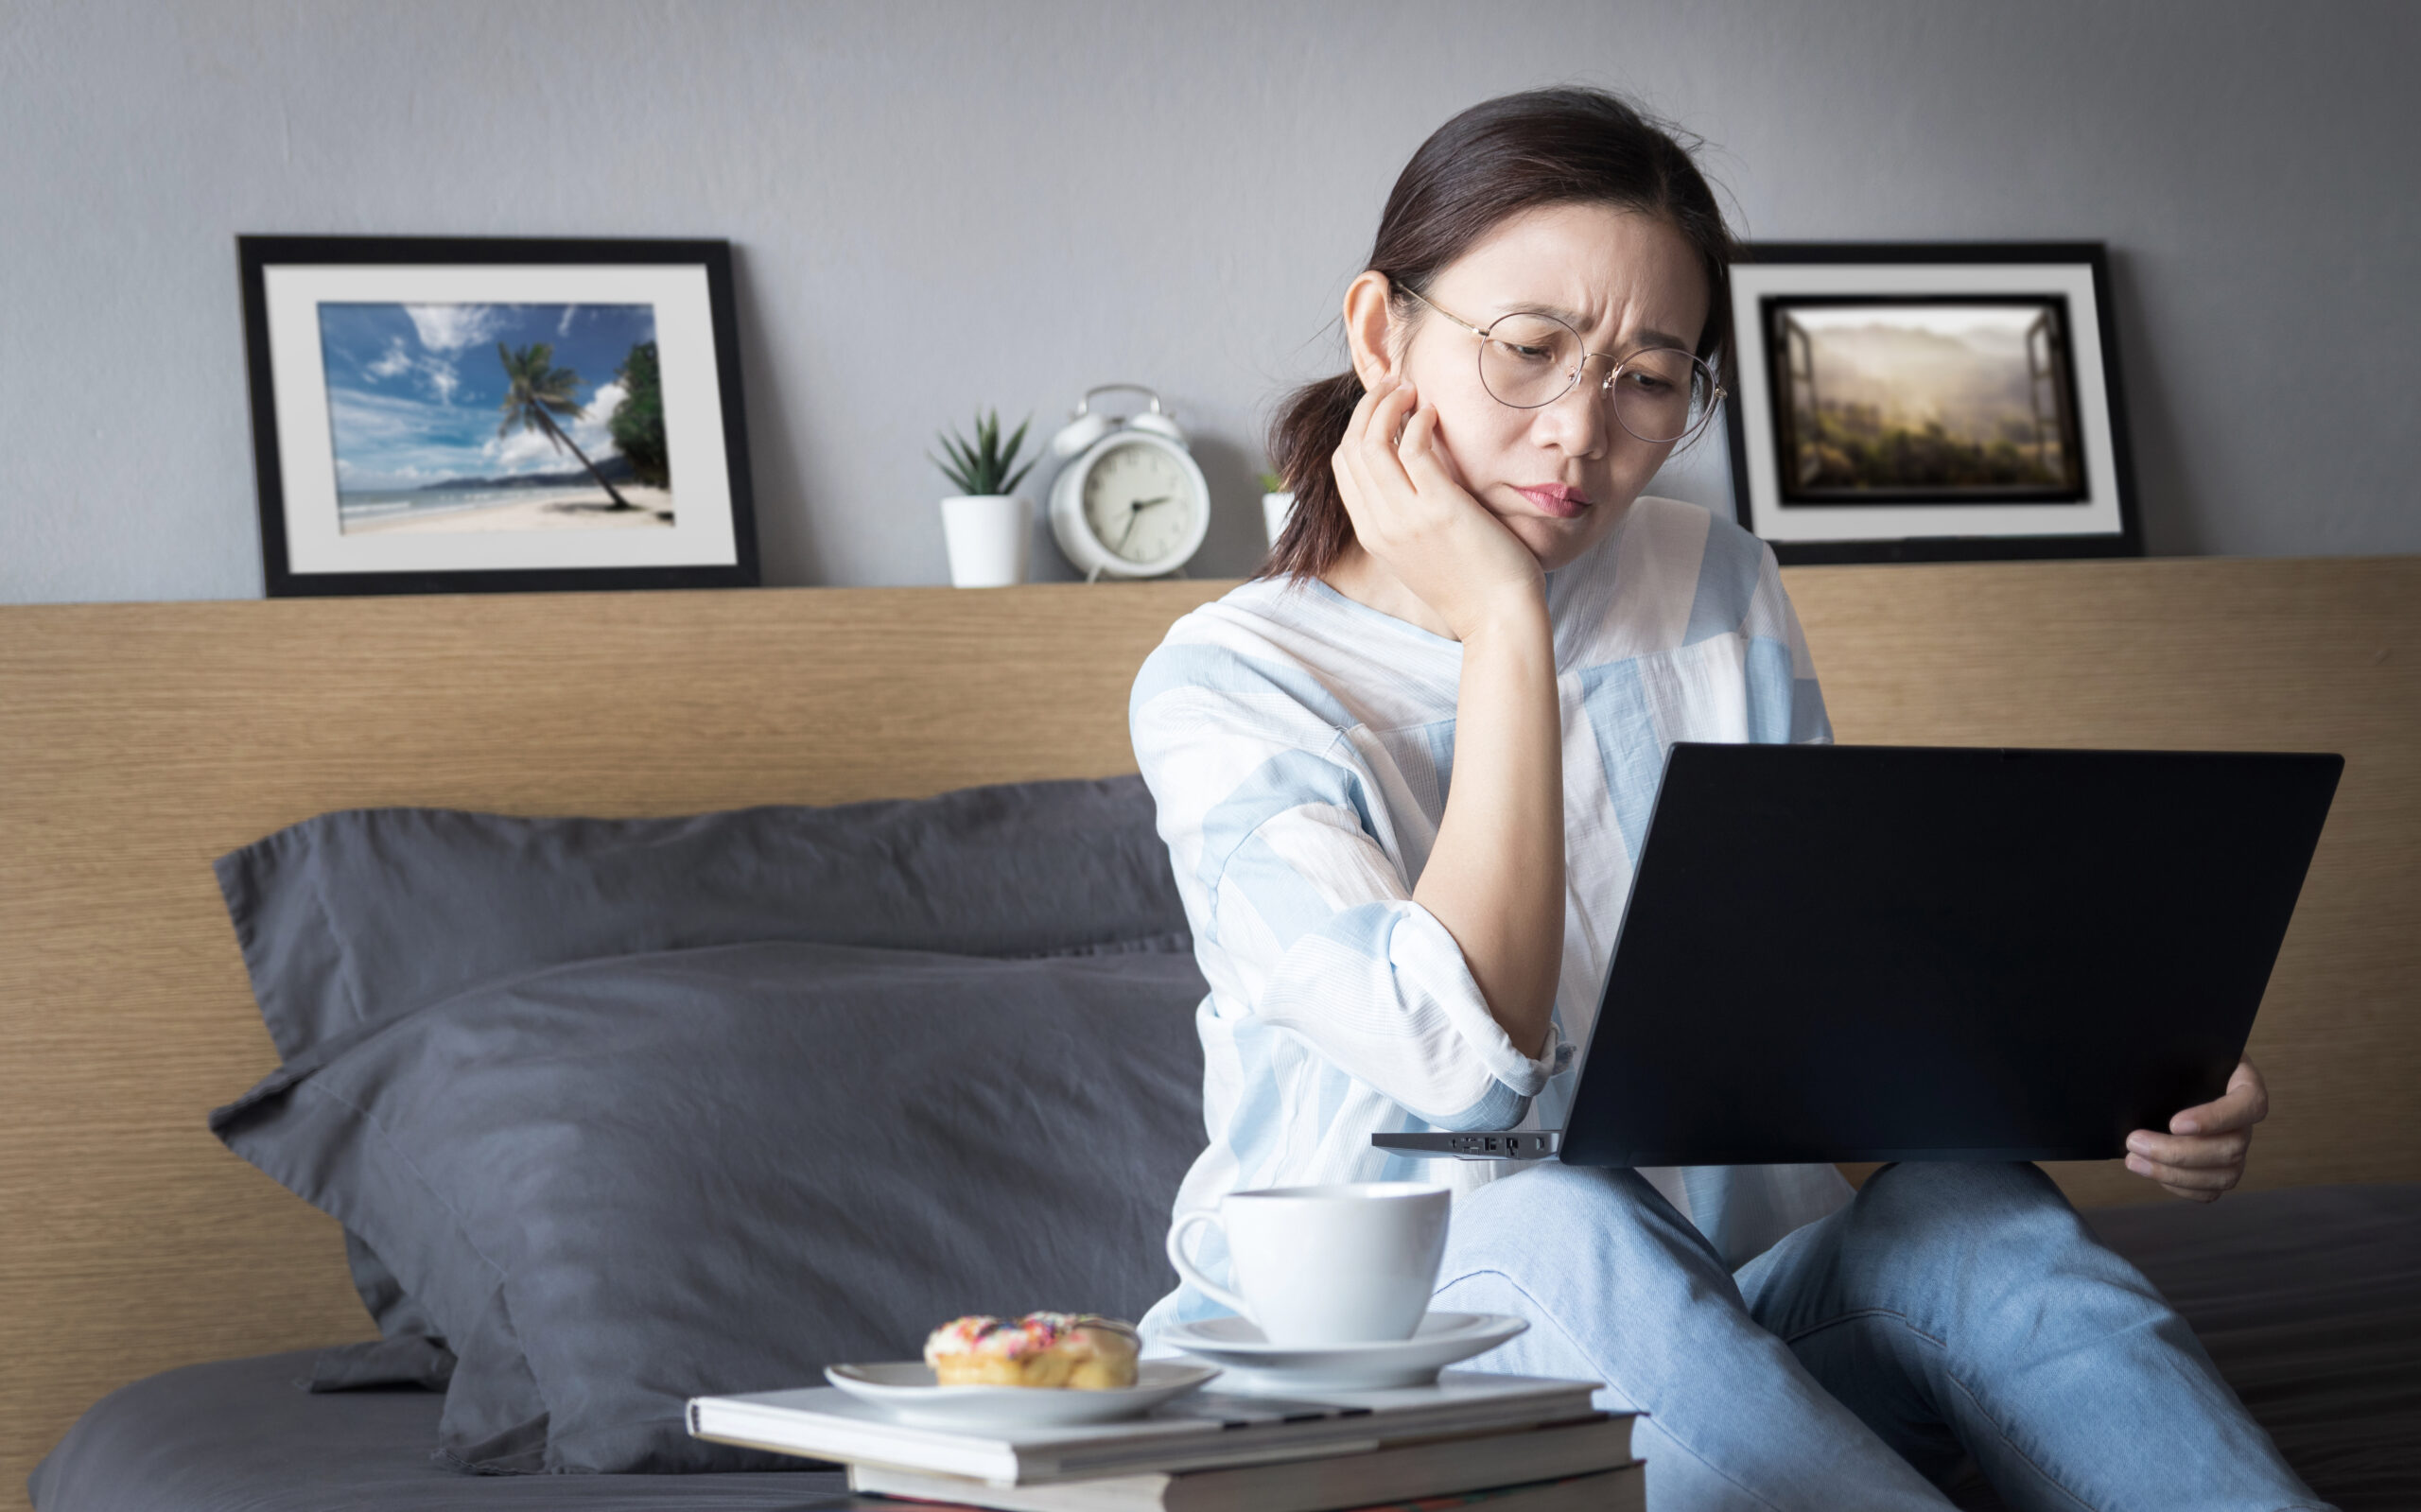 working from home, new normal concept. woman working with laptop computer on bed from her room during self isolation with stress emotion during transmission of COVID-19 Coronavirus pandemic